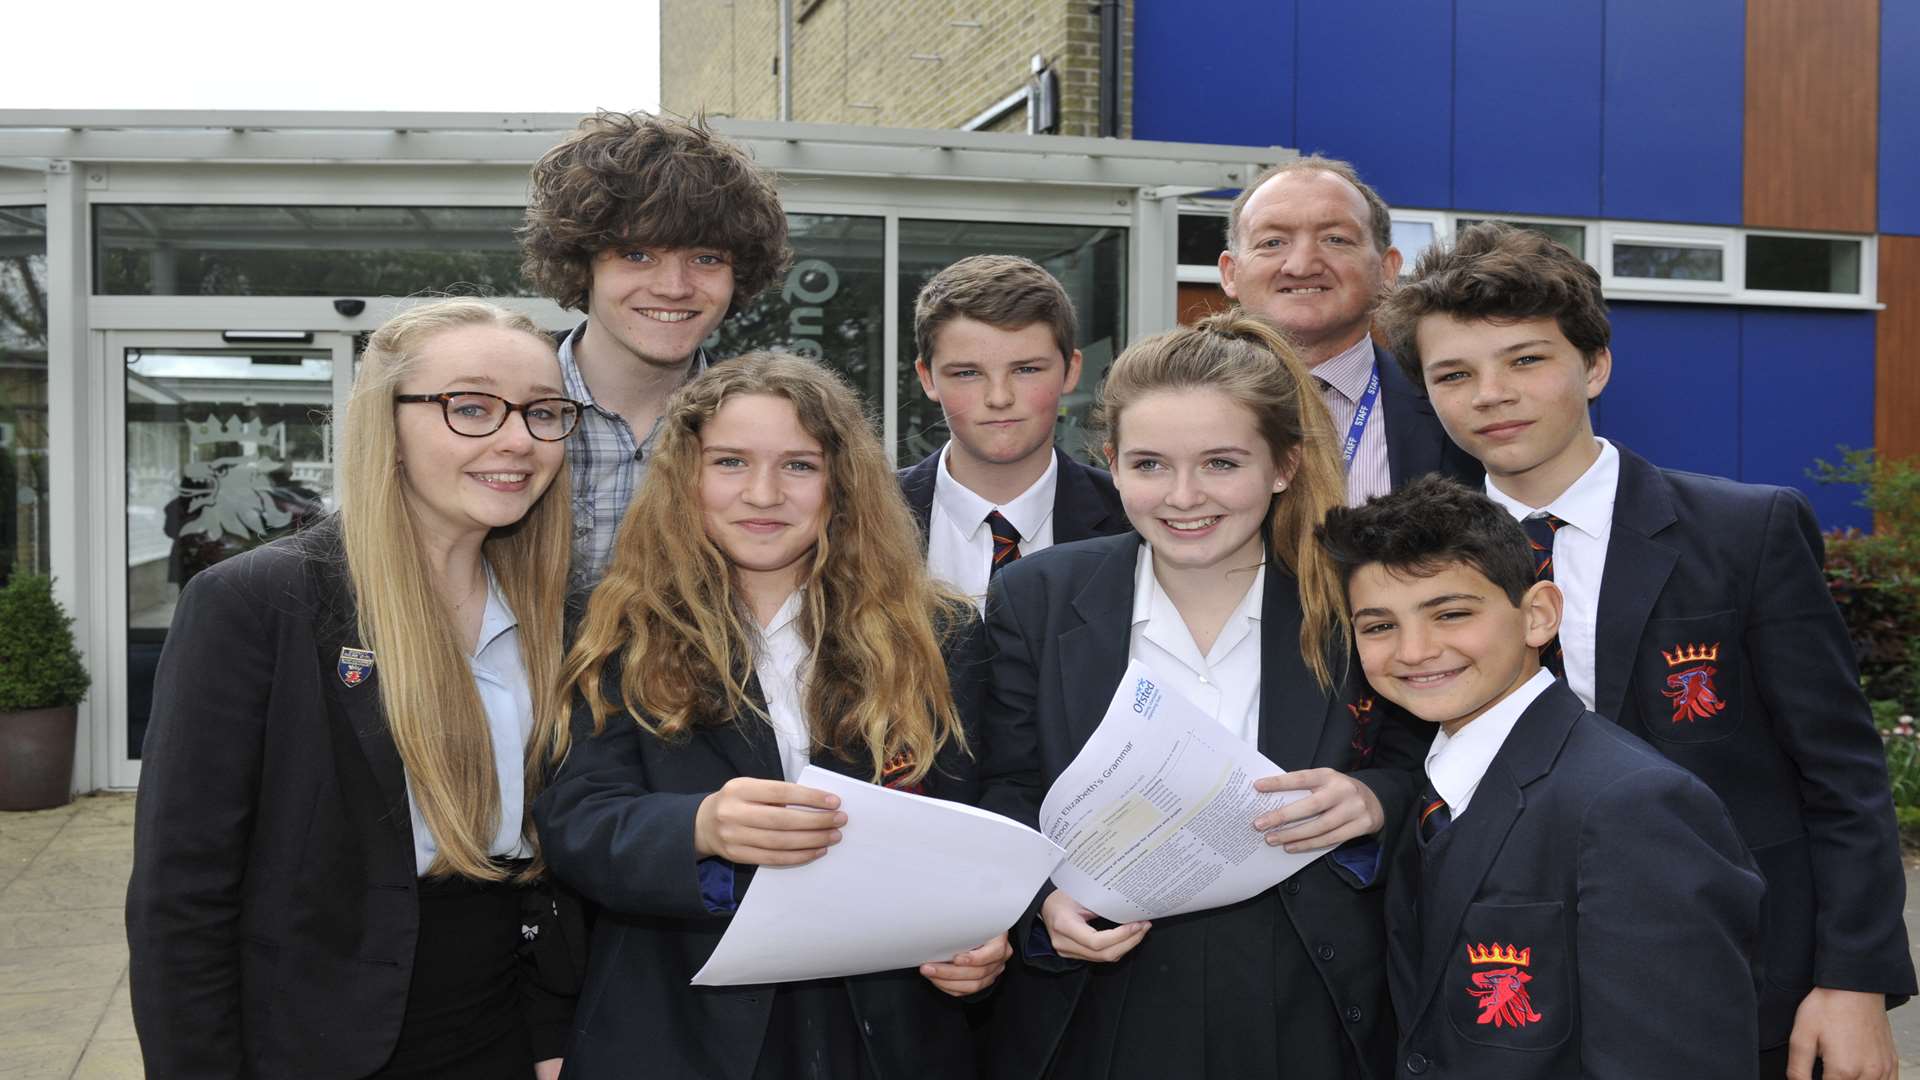 QEGS pupils with head teacher David Anderson.